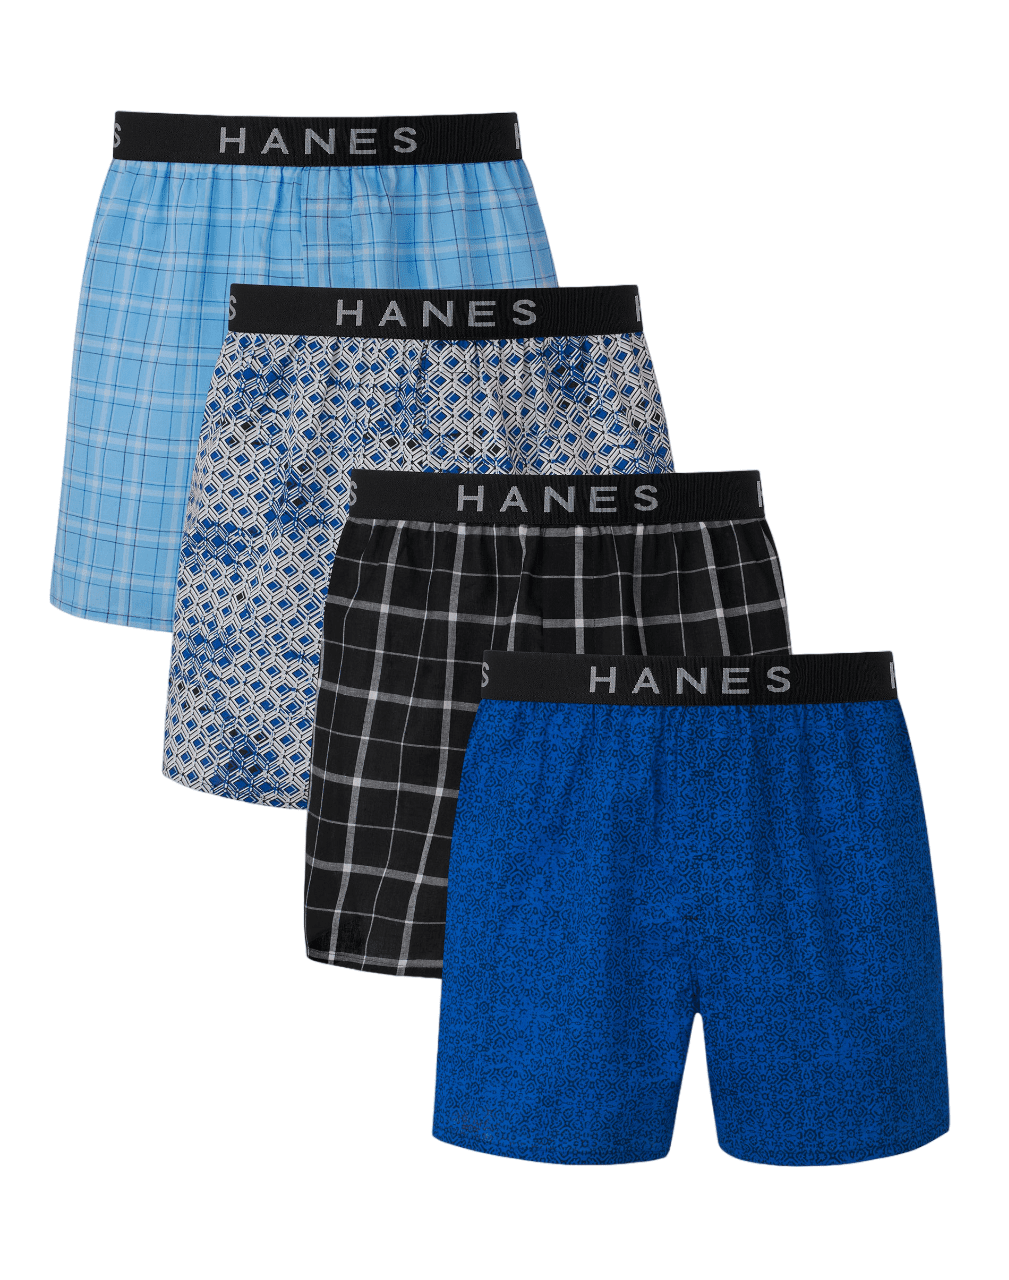 Hanes Mens Ultimate Big Woven Boxers Underwear Pack, Assorted Prints, 4-Pack (Big & Tall Sizes)